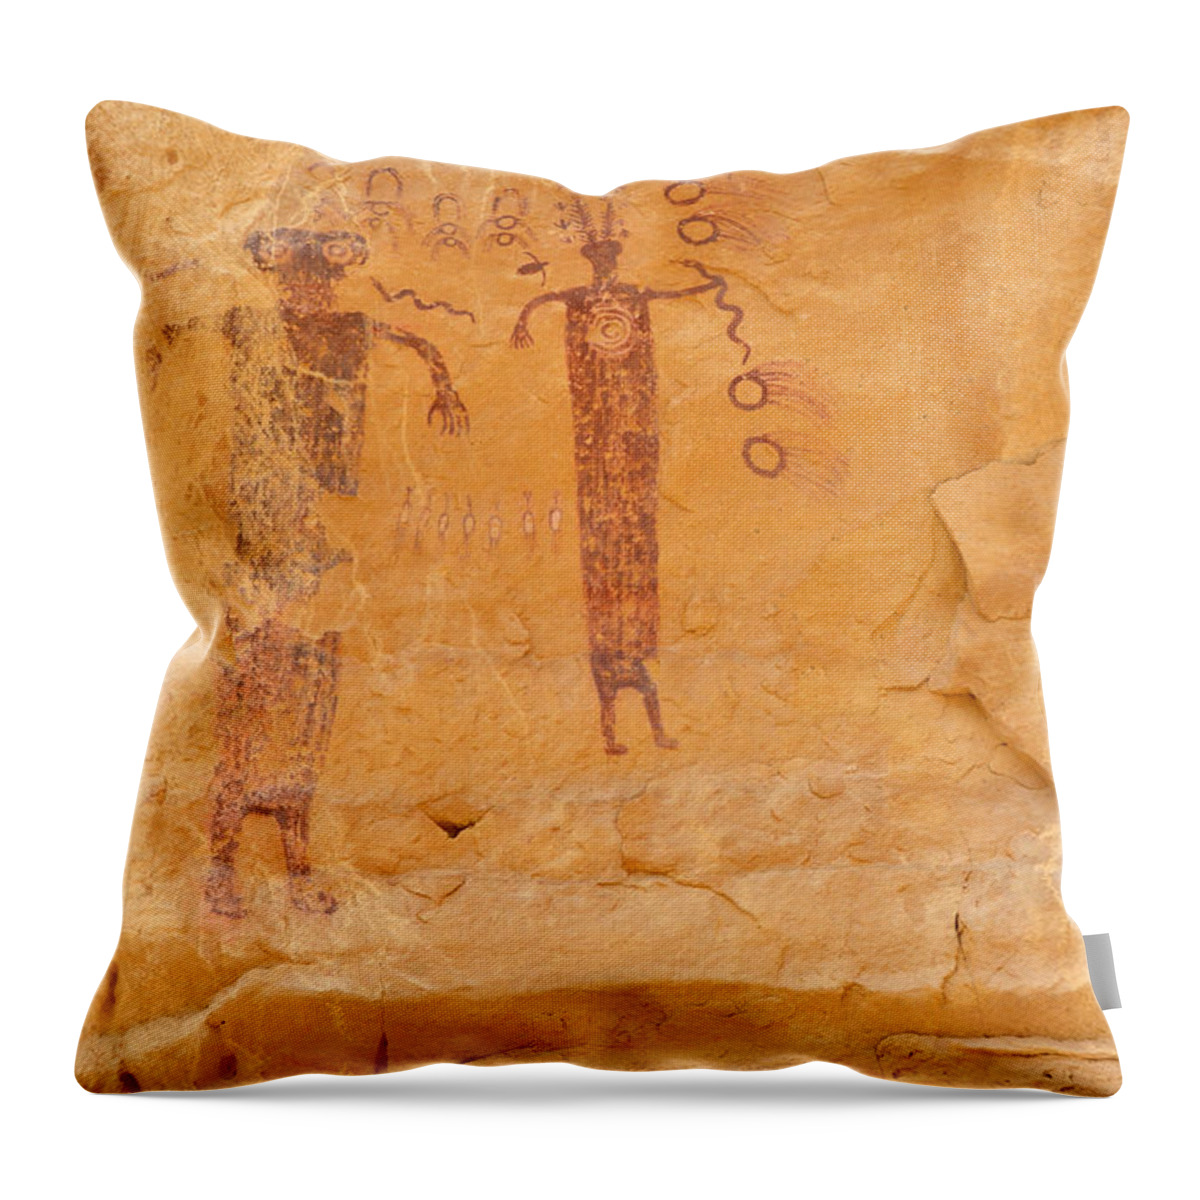 Head Throw Pillow featuring the photograph Sinbad Pictograph by Tranquil Light Photography